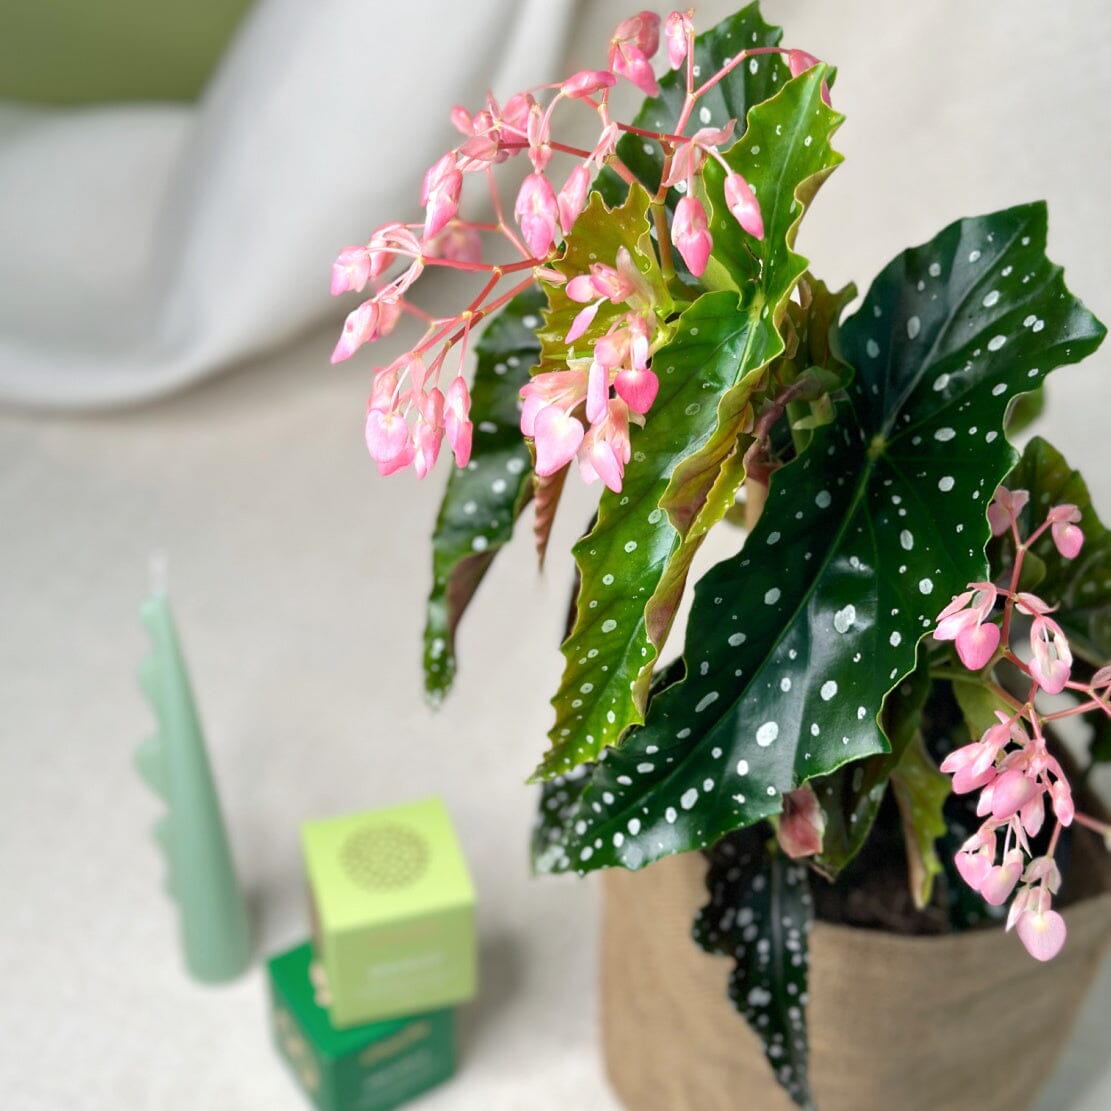 Best indoor plant gift delivery service | Same day gift delivery Melbourne and Geelong | Large Begonia Plant